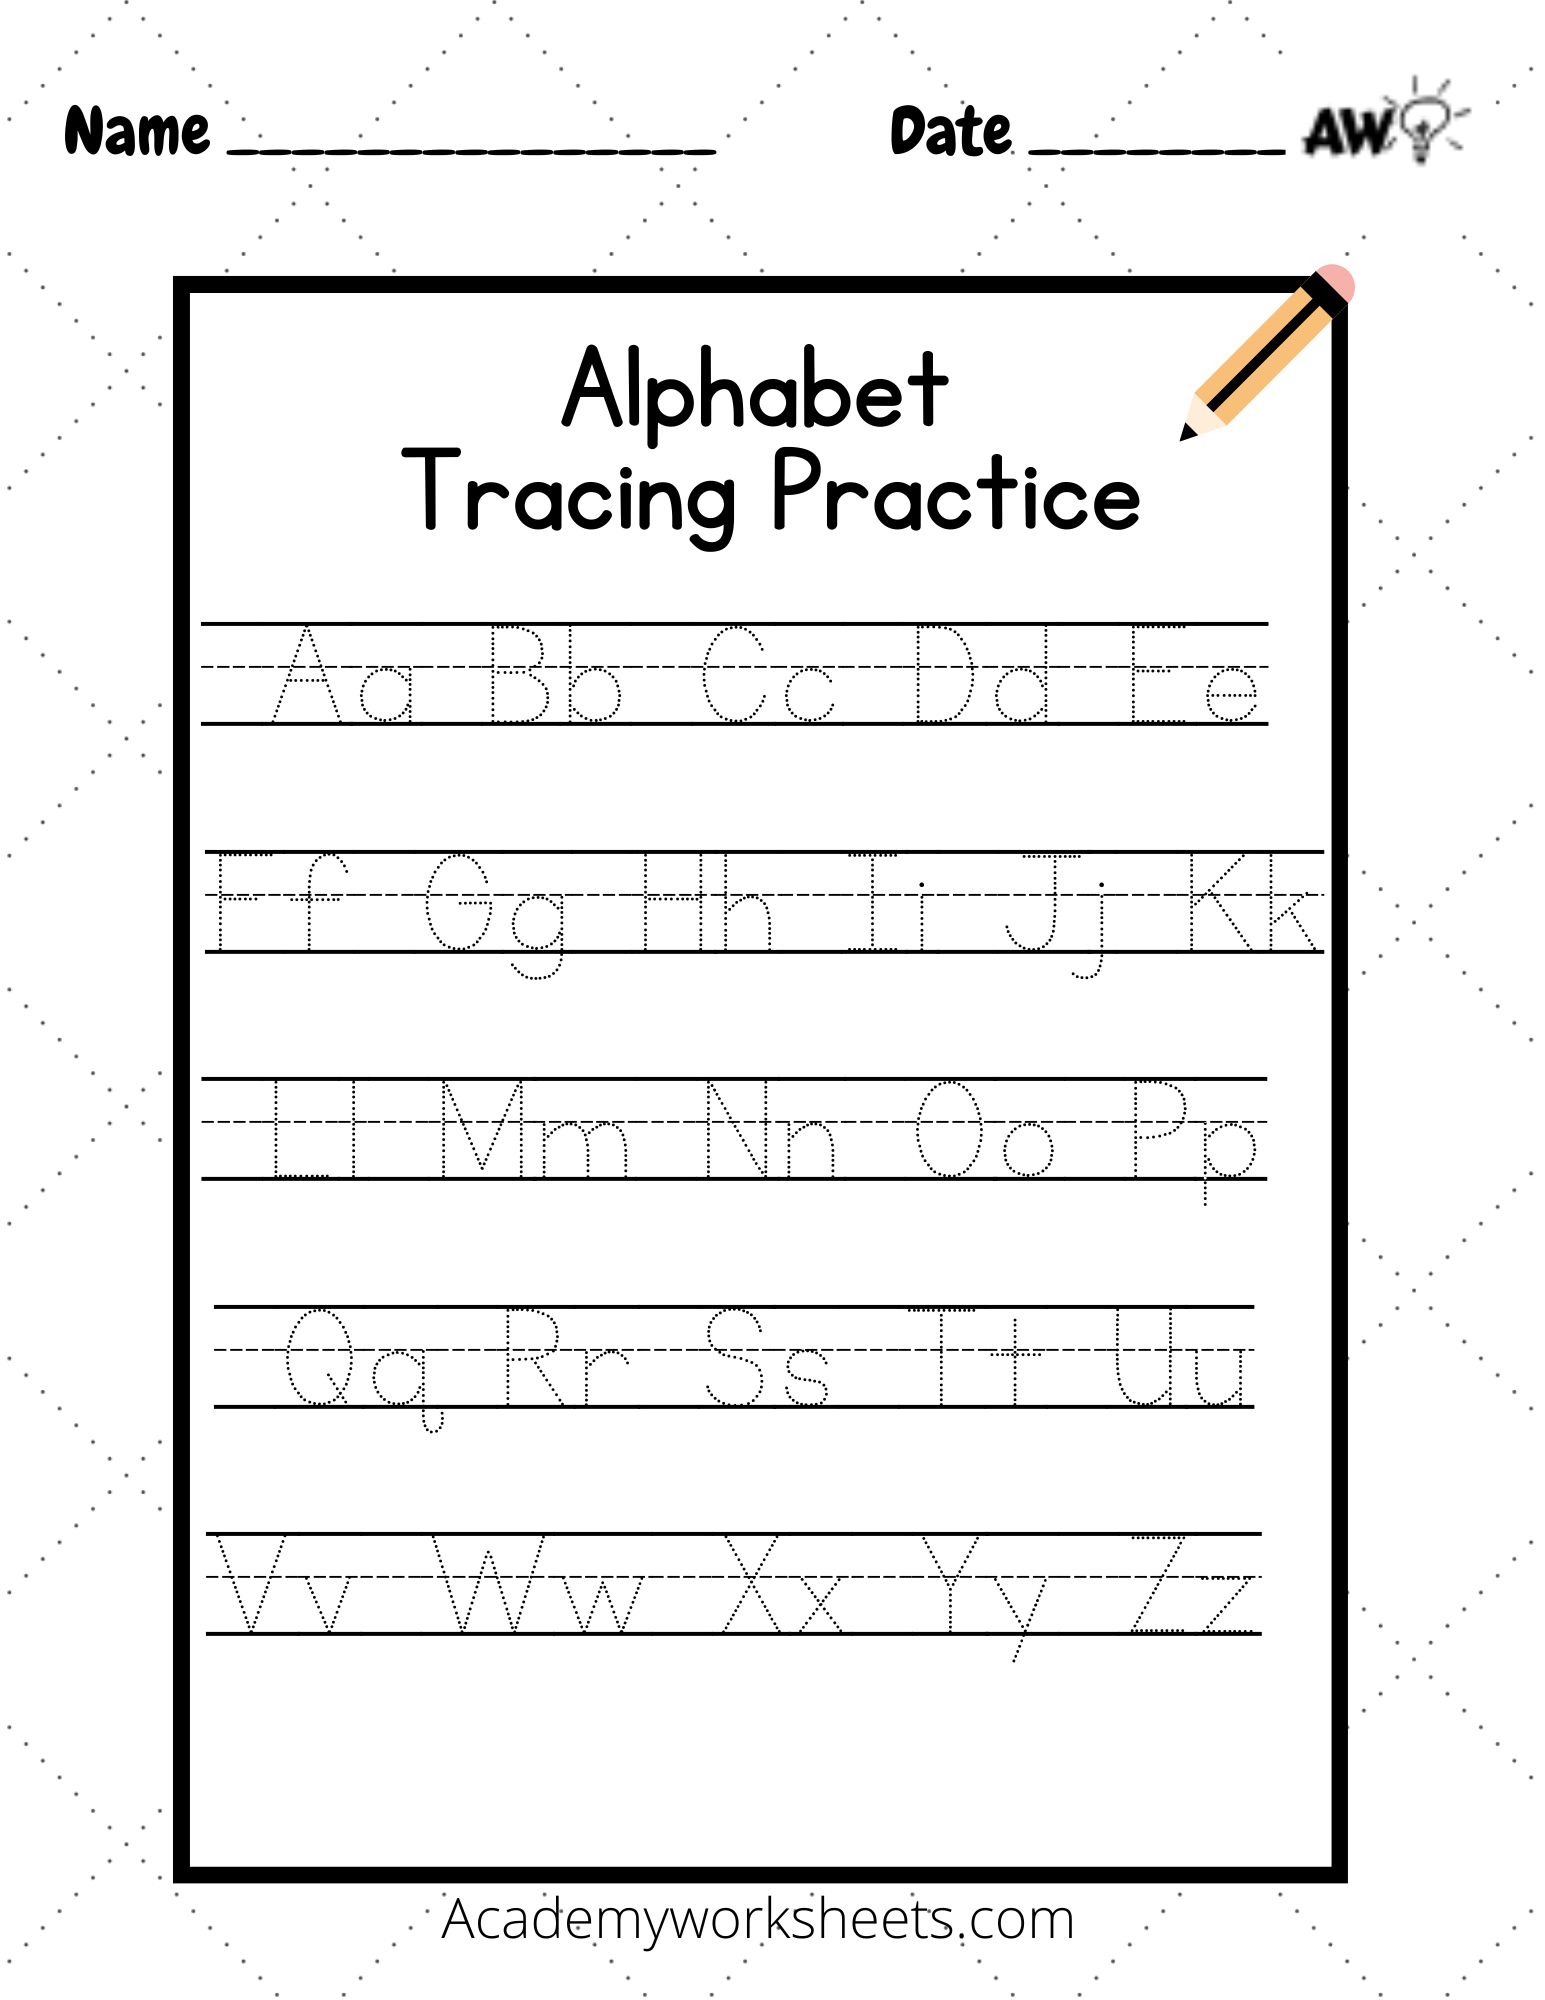 letter-tracing-worksheets-handwriting-abc-worksheets-academy-worksheets